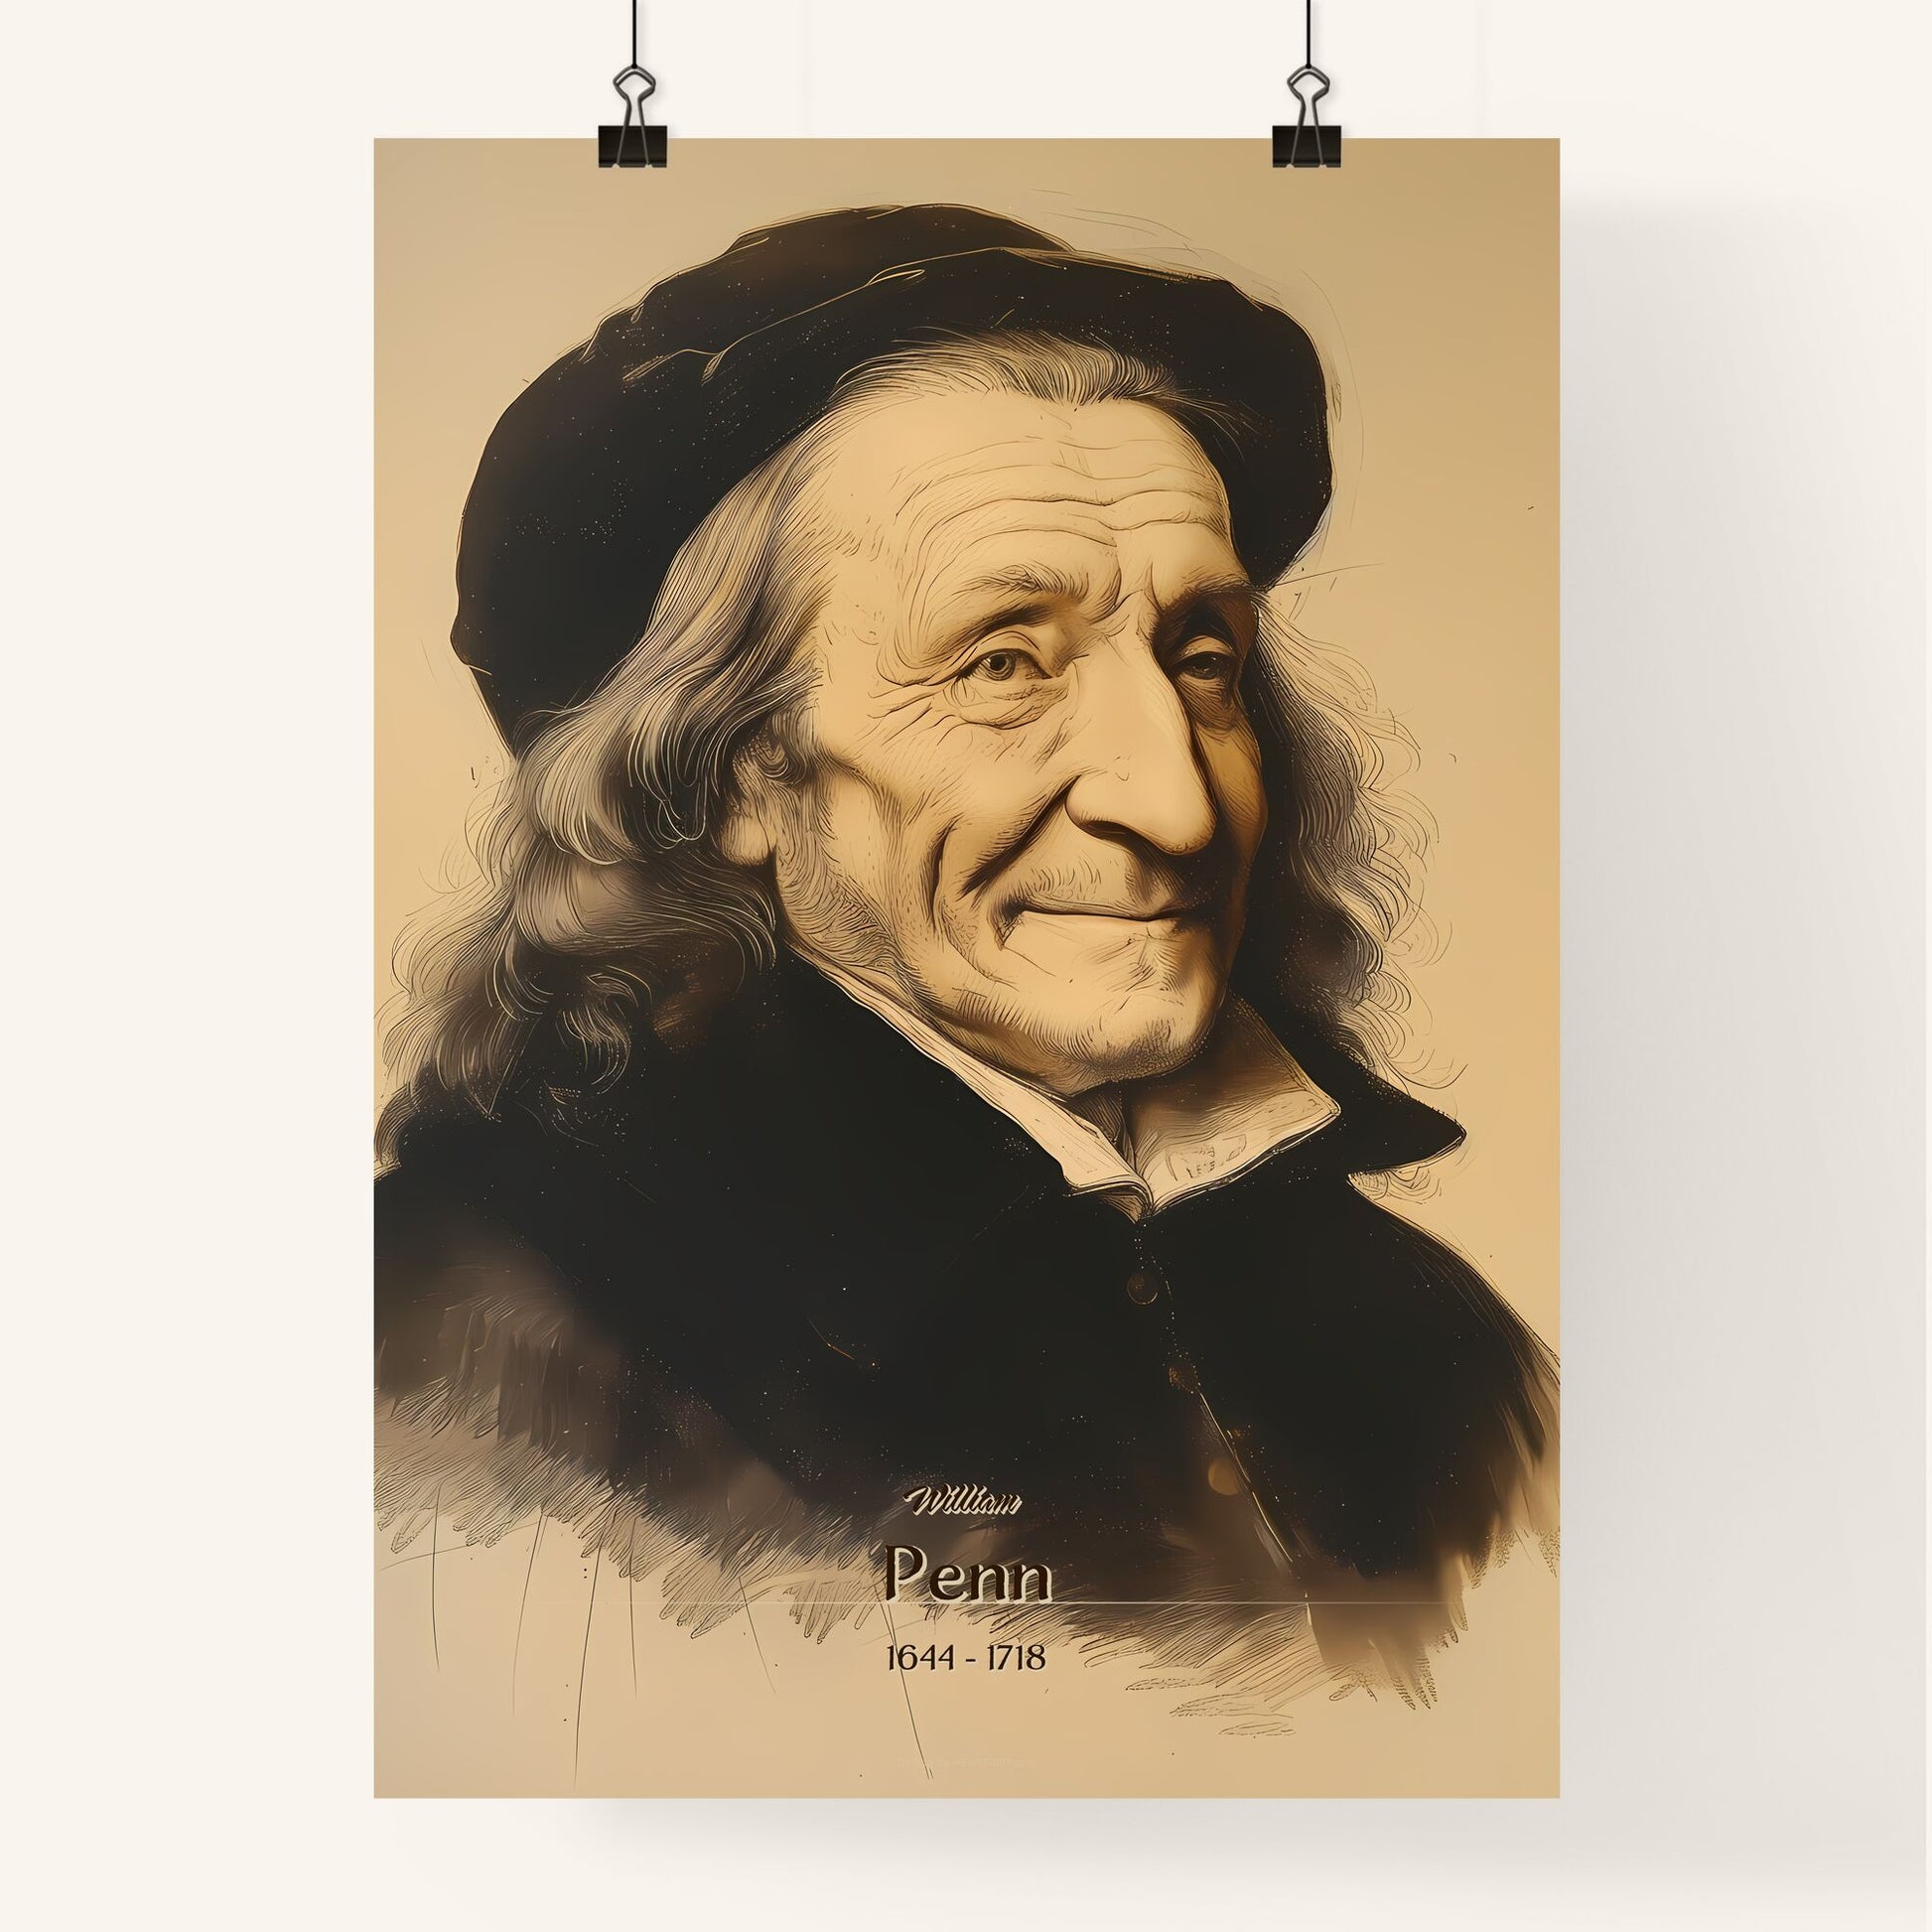 William, Penn, 1644 - 1718, A Poster of a man with long hair wearing a hat Default Title